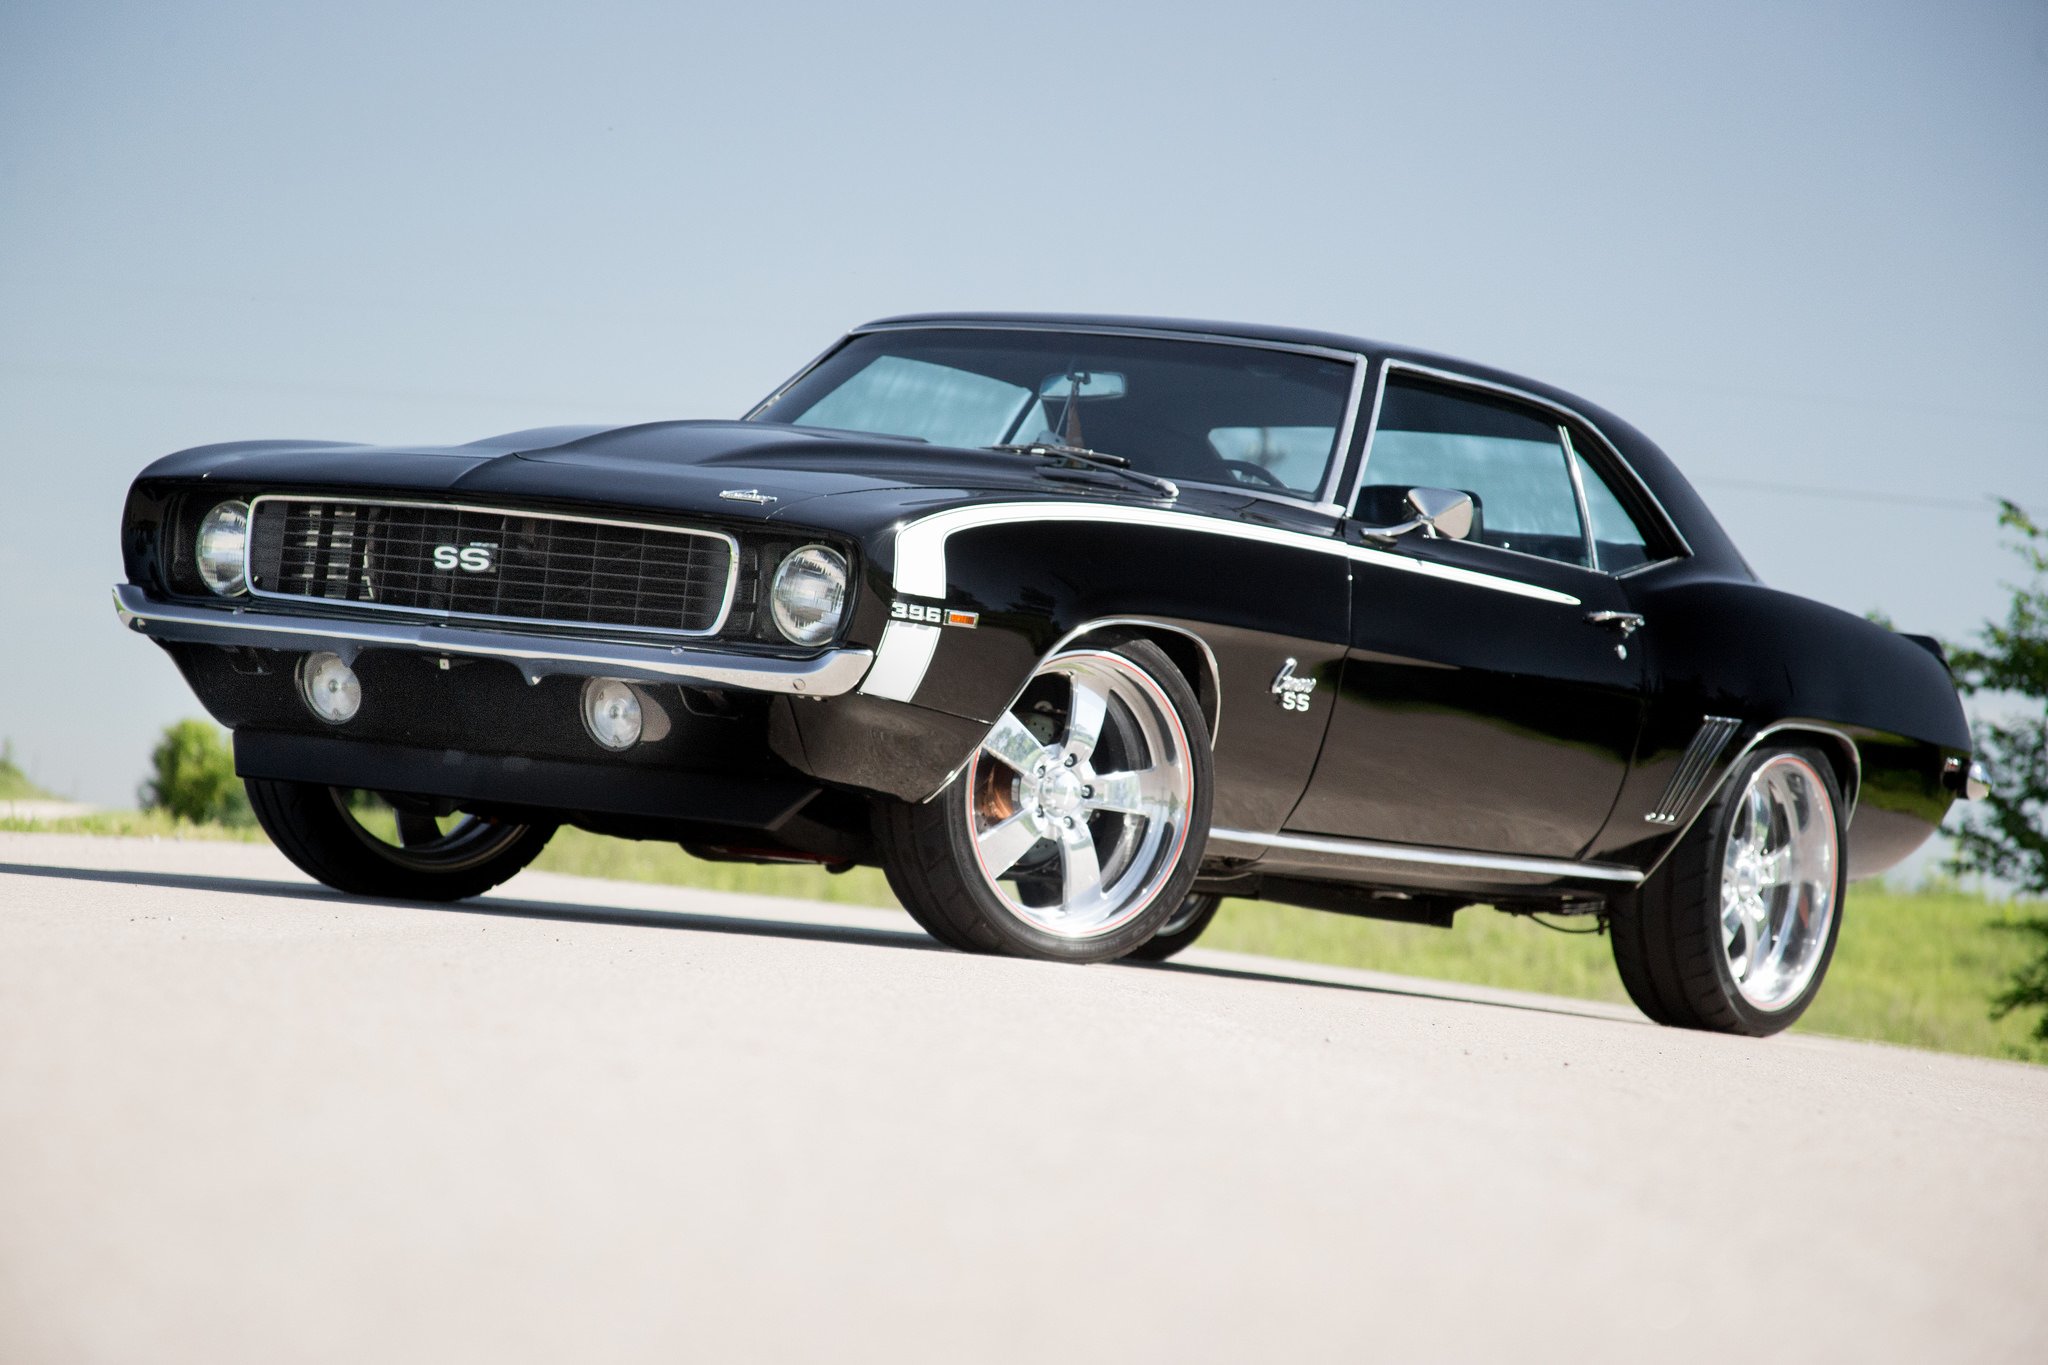 1969, Cars, Coupe, Camaro ss, Chevy, Chevrolet, Cars Wallpaper